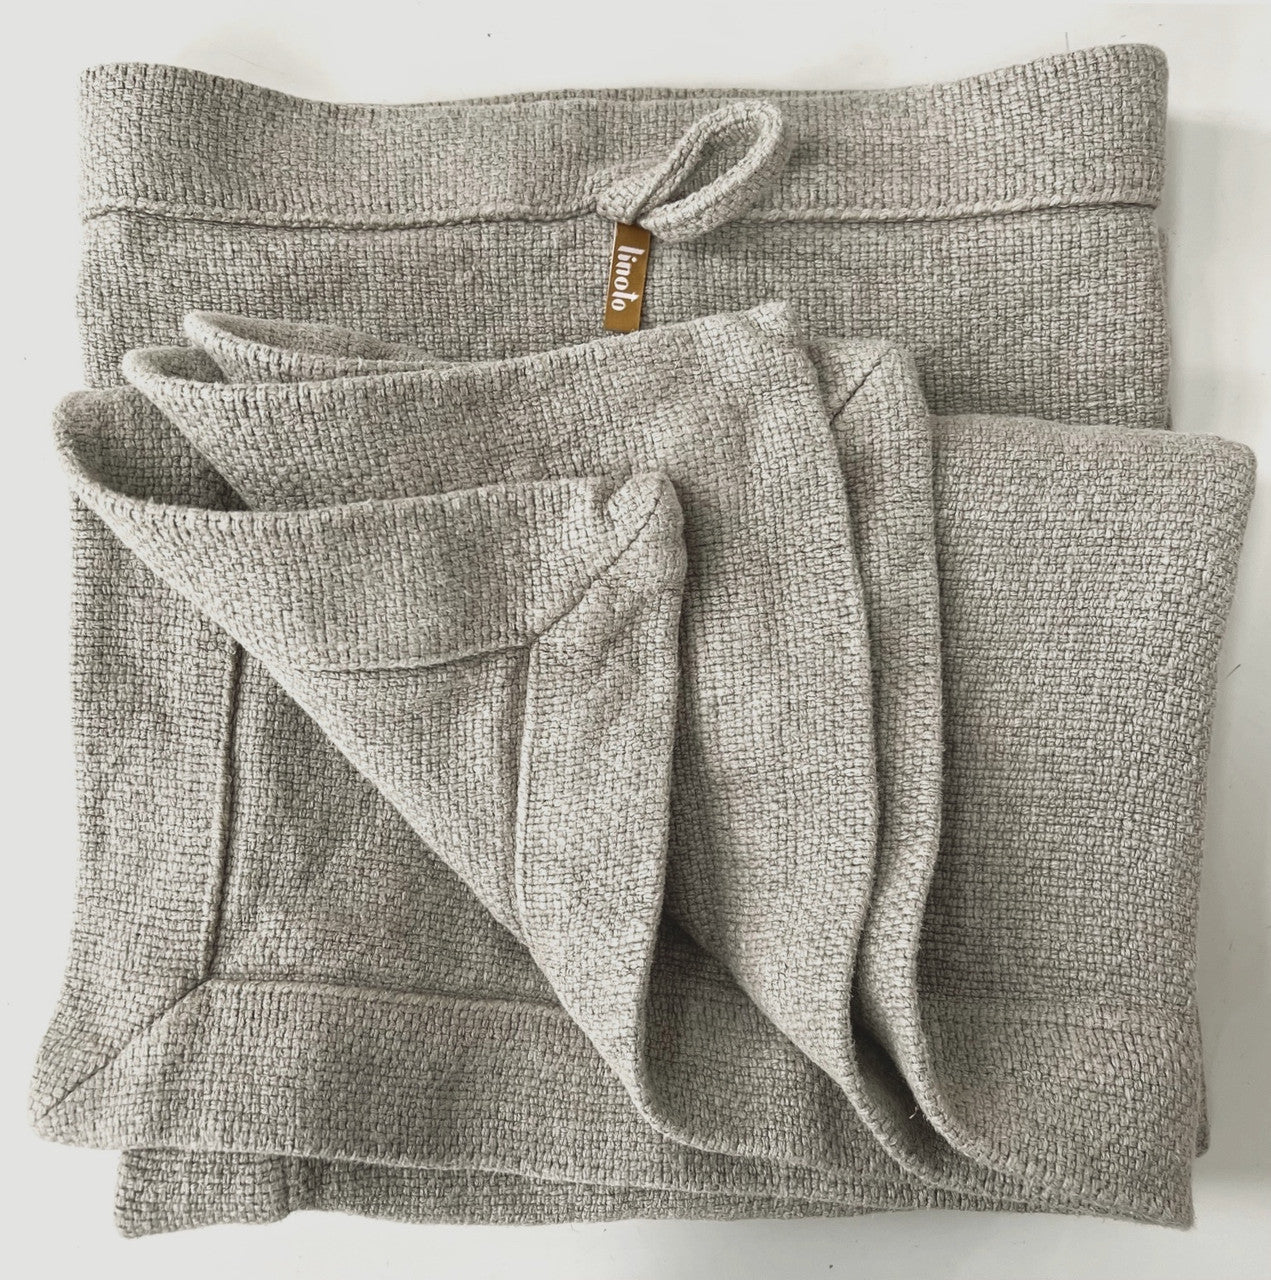 Linen Tea Towels, Durable and functional